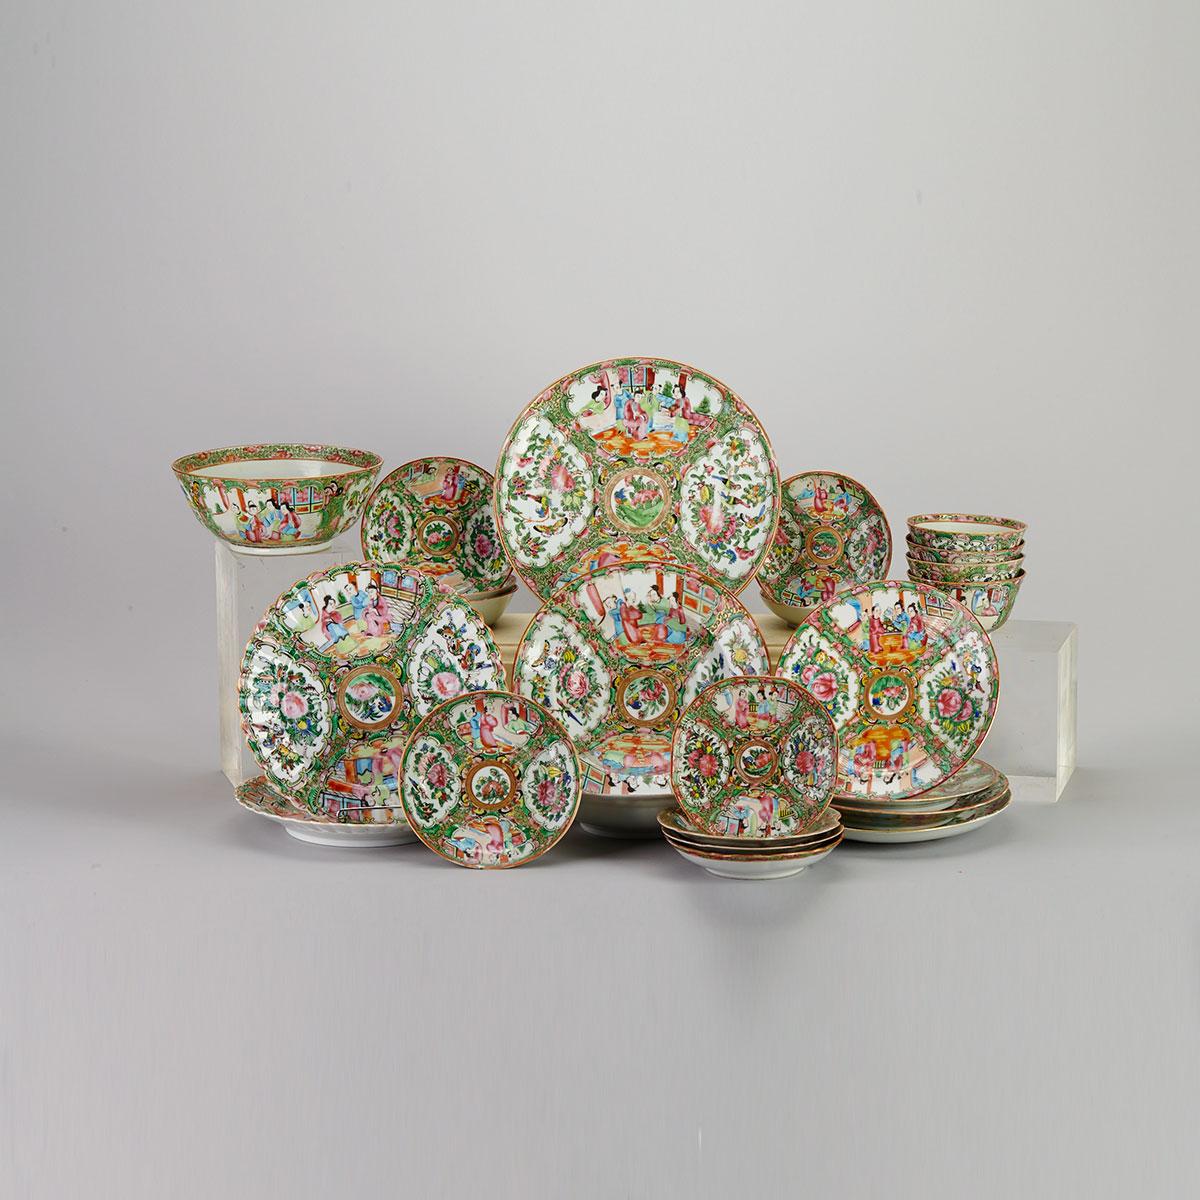 Group of 24 Export Canton Rose Plates, Dishes and Bowls, 19th Century